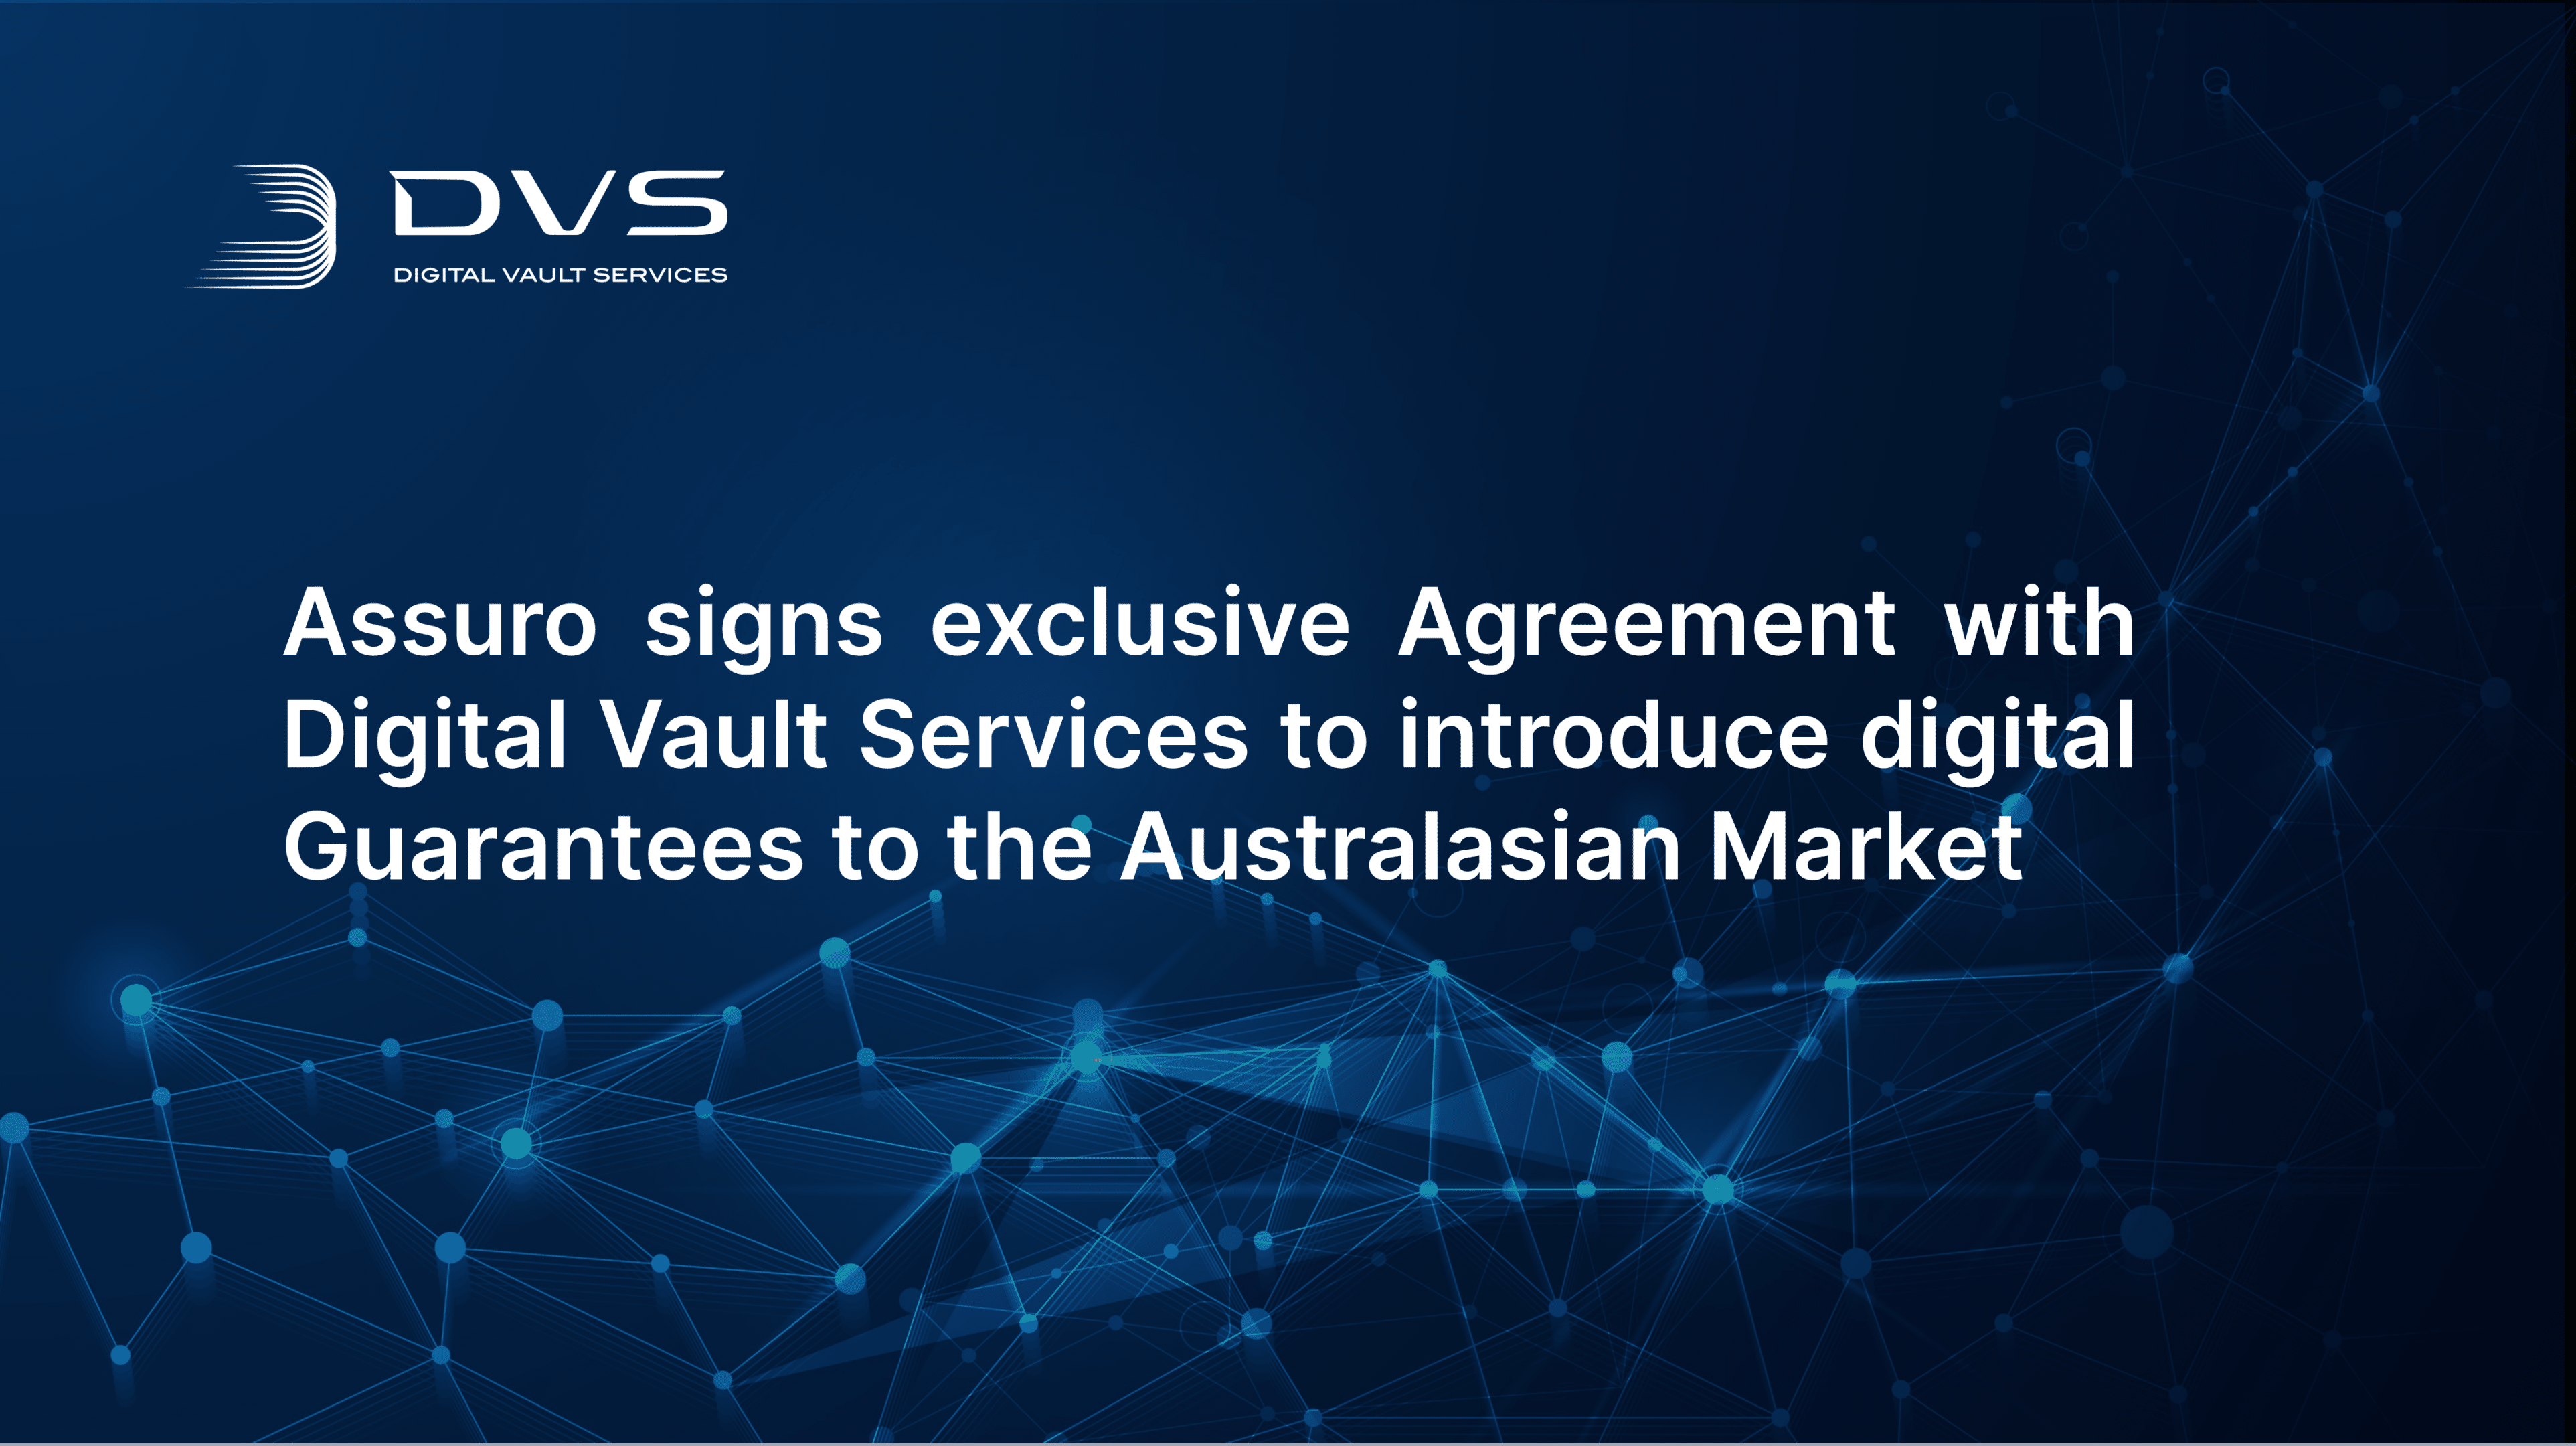 Assuro signs exclusive agreement with Digital Vault Services to introduce digital Guarantees to the Australasian Market